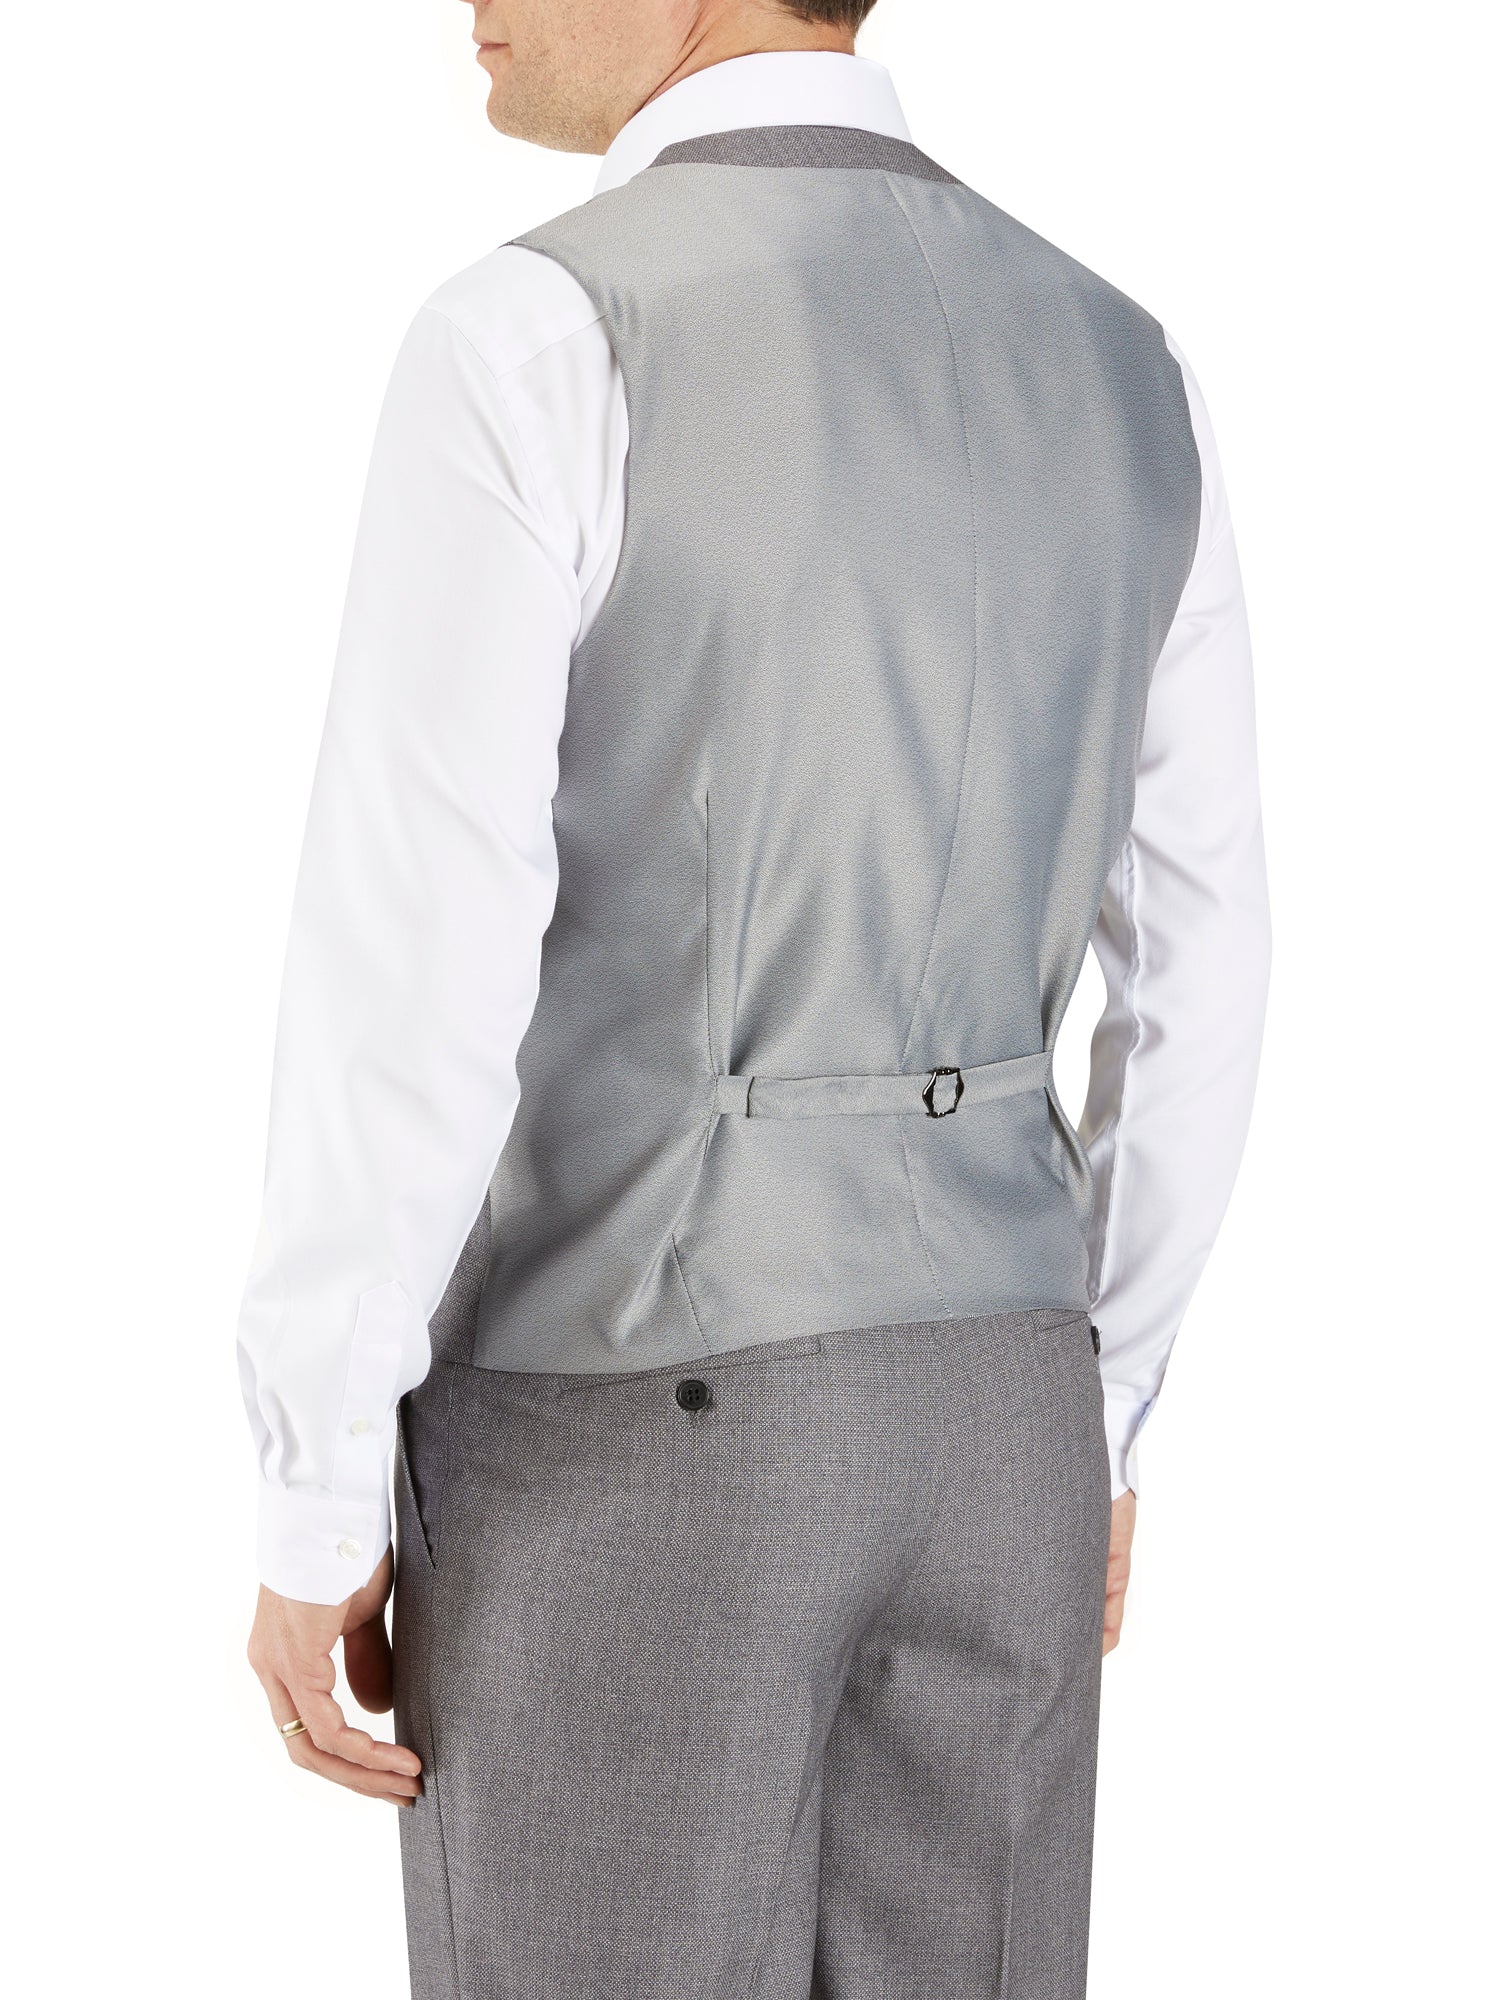 Harcourt Silver Tapered Fit Jacket - Spirit Clothing